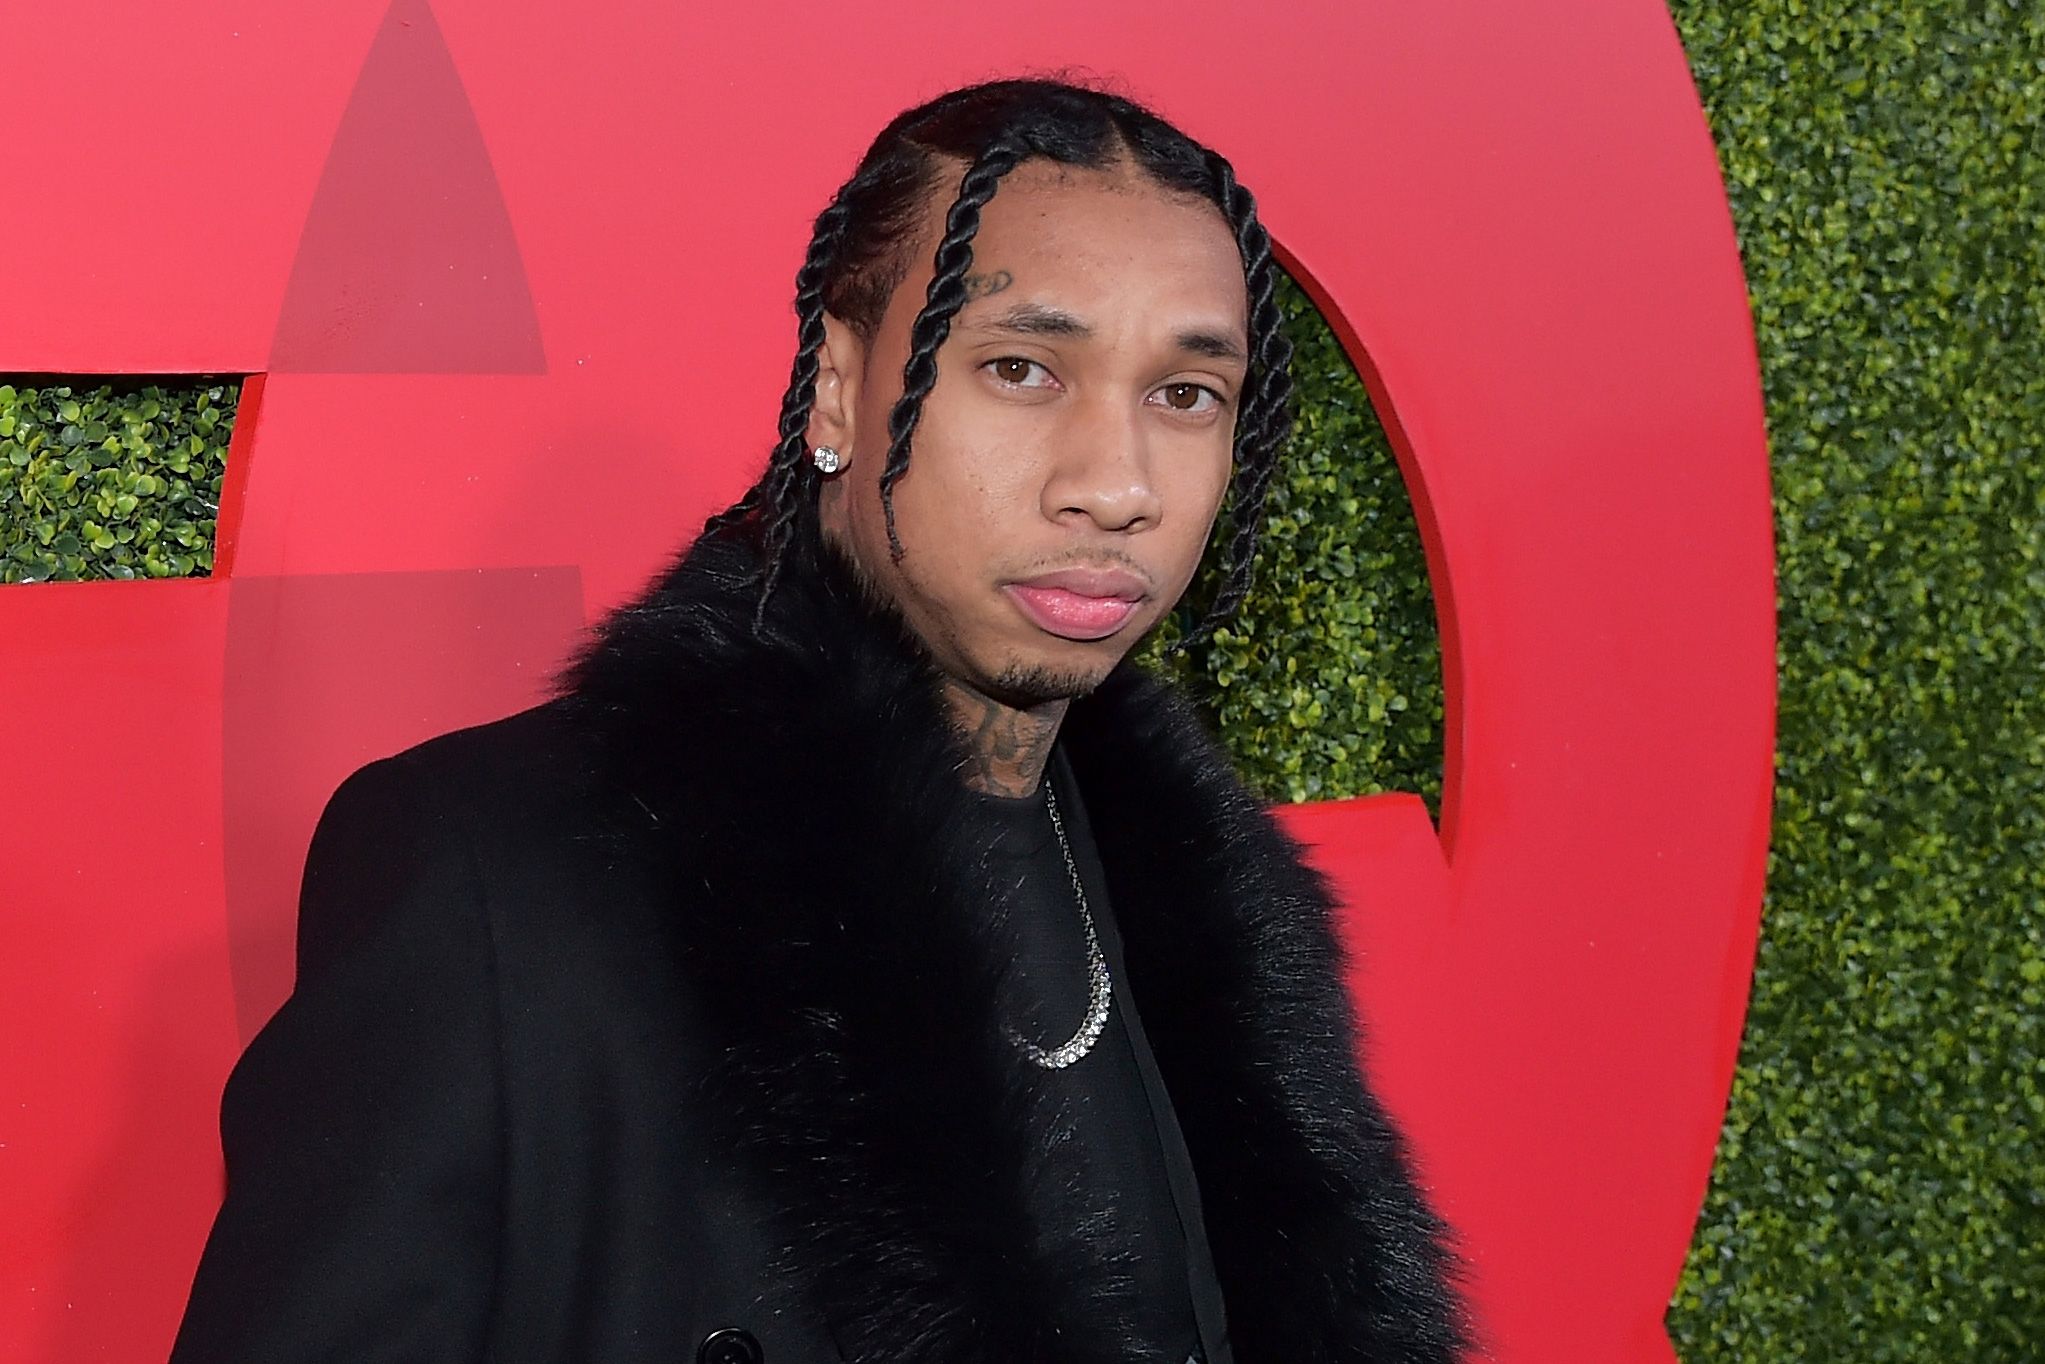 Tyga won’t face felony charges related to domestic violence case